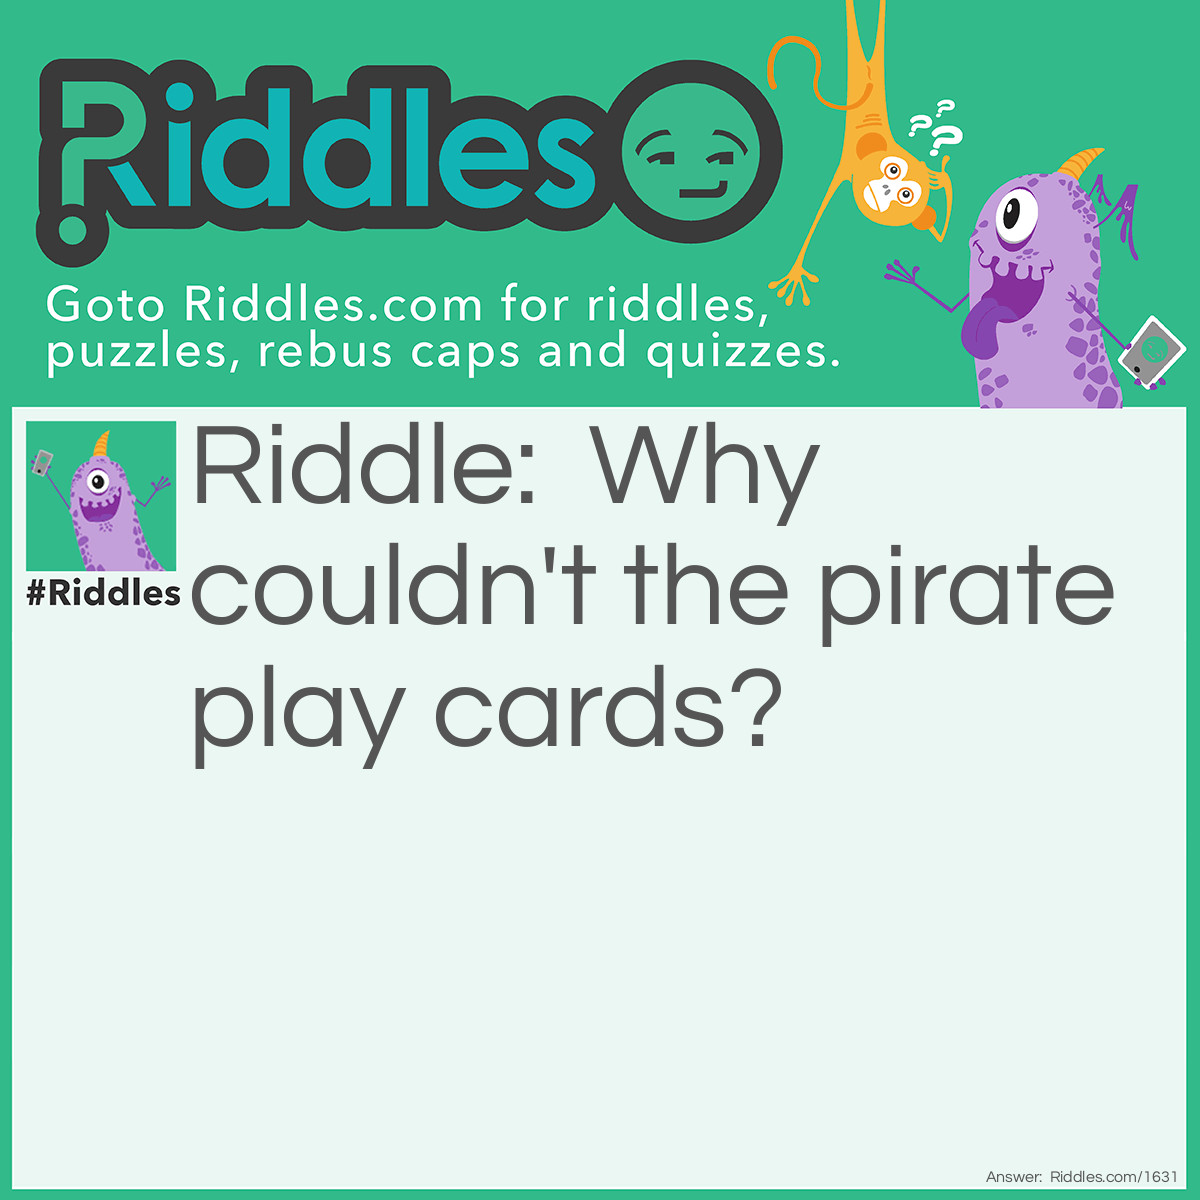 Riddle: Why couldn't the pirate play cards? Answer: Because he was standing on the deck.